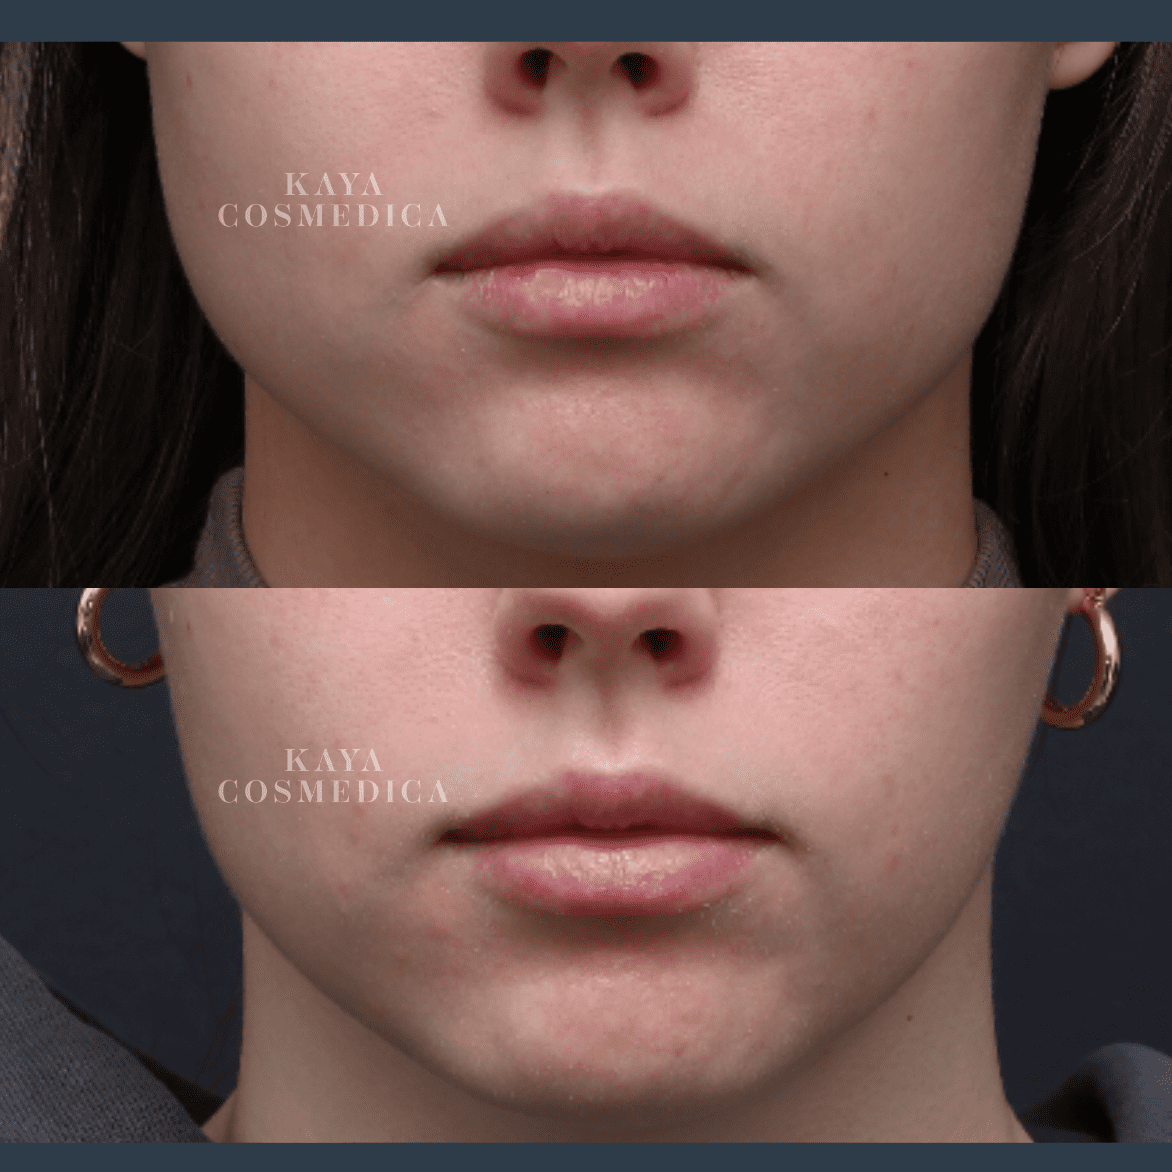 Top and bottom close-up photos of a woman's lower face before and after an anti-wrinkle cosmetic procedure, showing subtle changes in lip fullness, marked with the logo "kaya cosmed